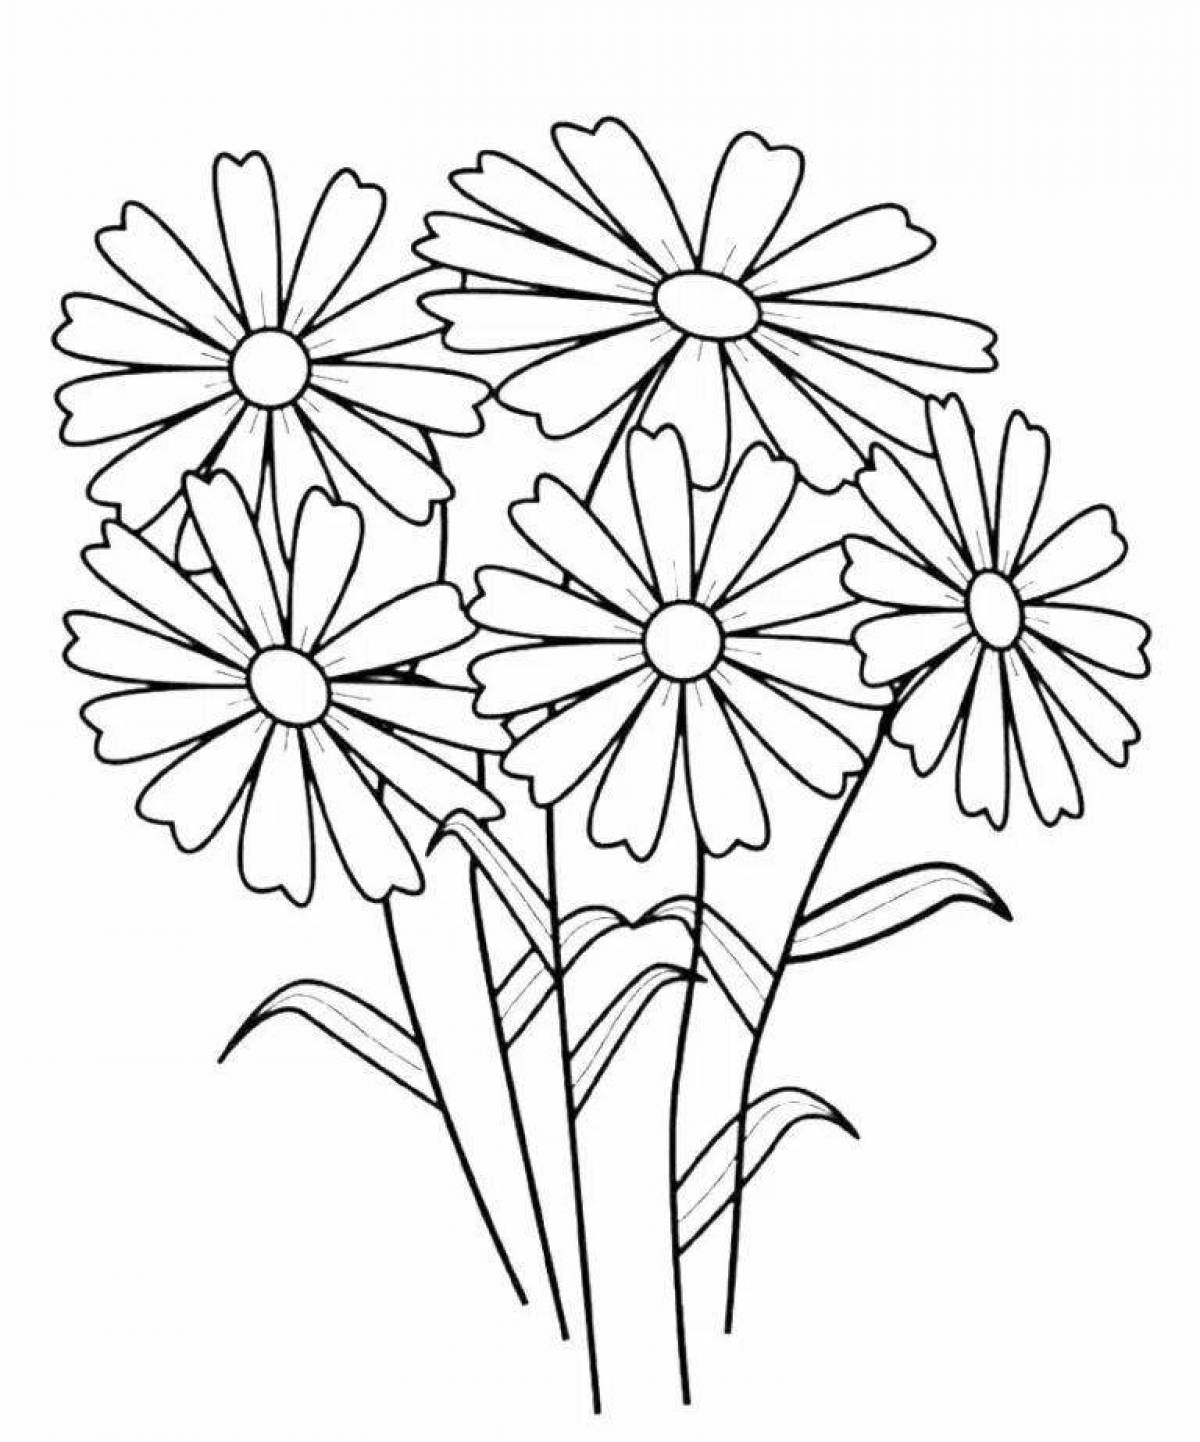 Colorful chamomile flowers coloring book